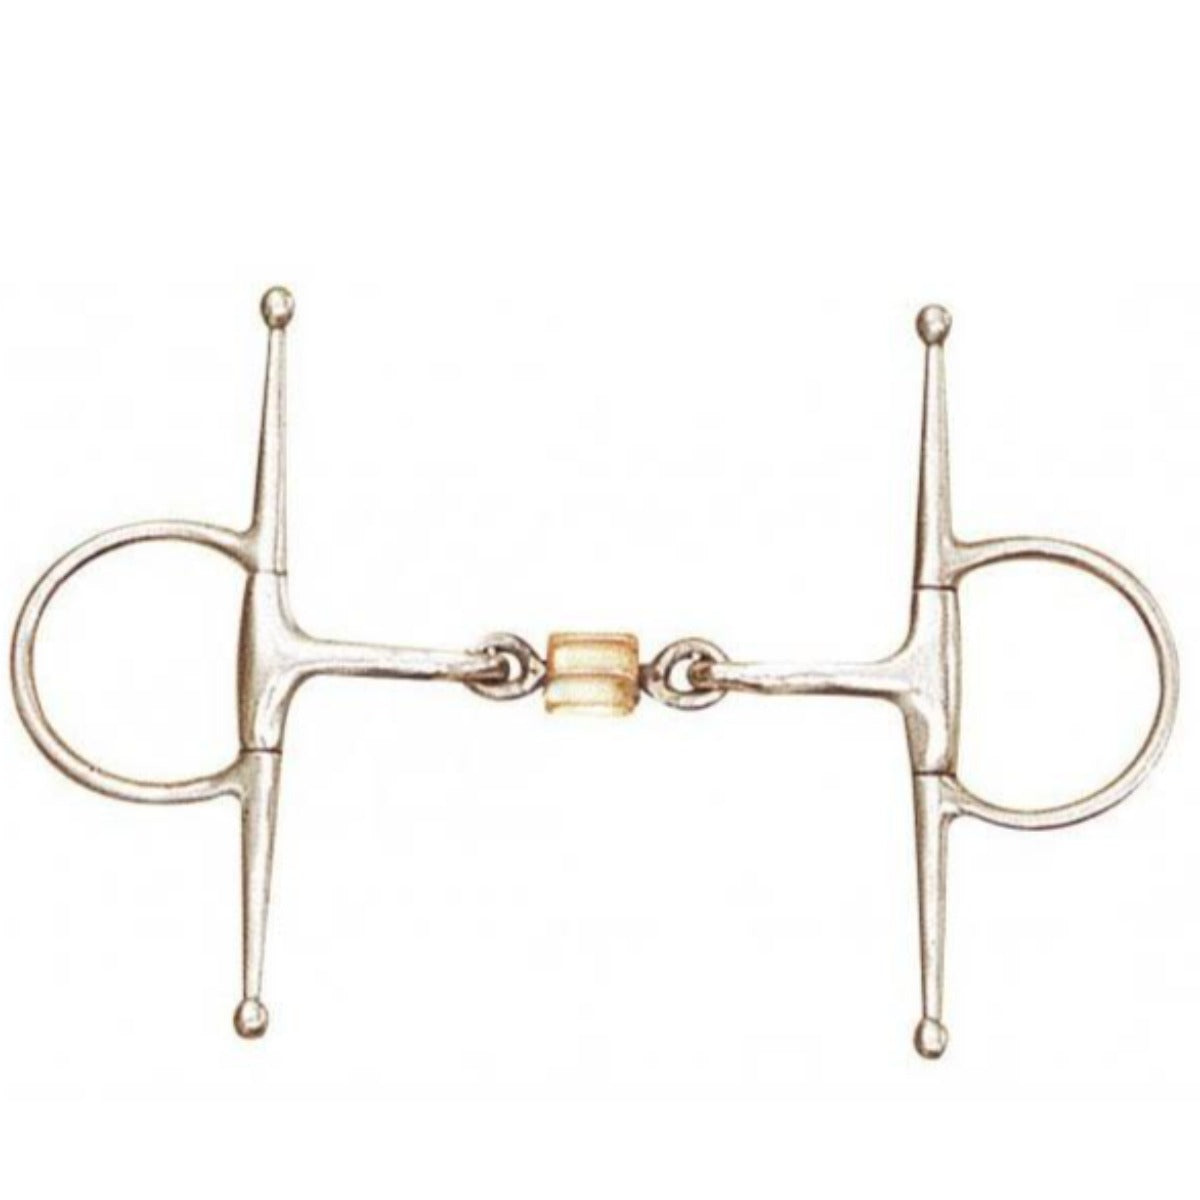 Centaur Stainless Steel Full Cheek Snaffle Bit with Copper Mouth